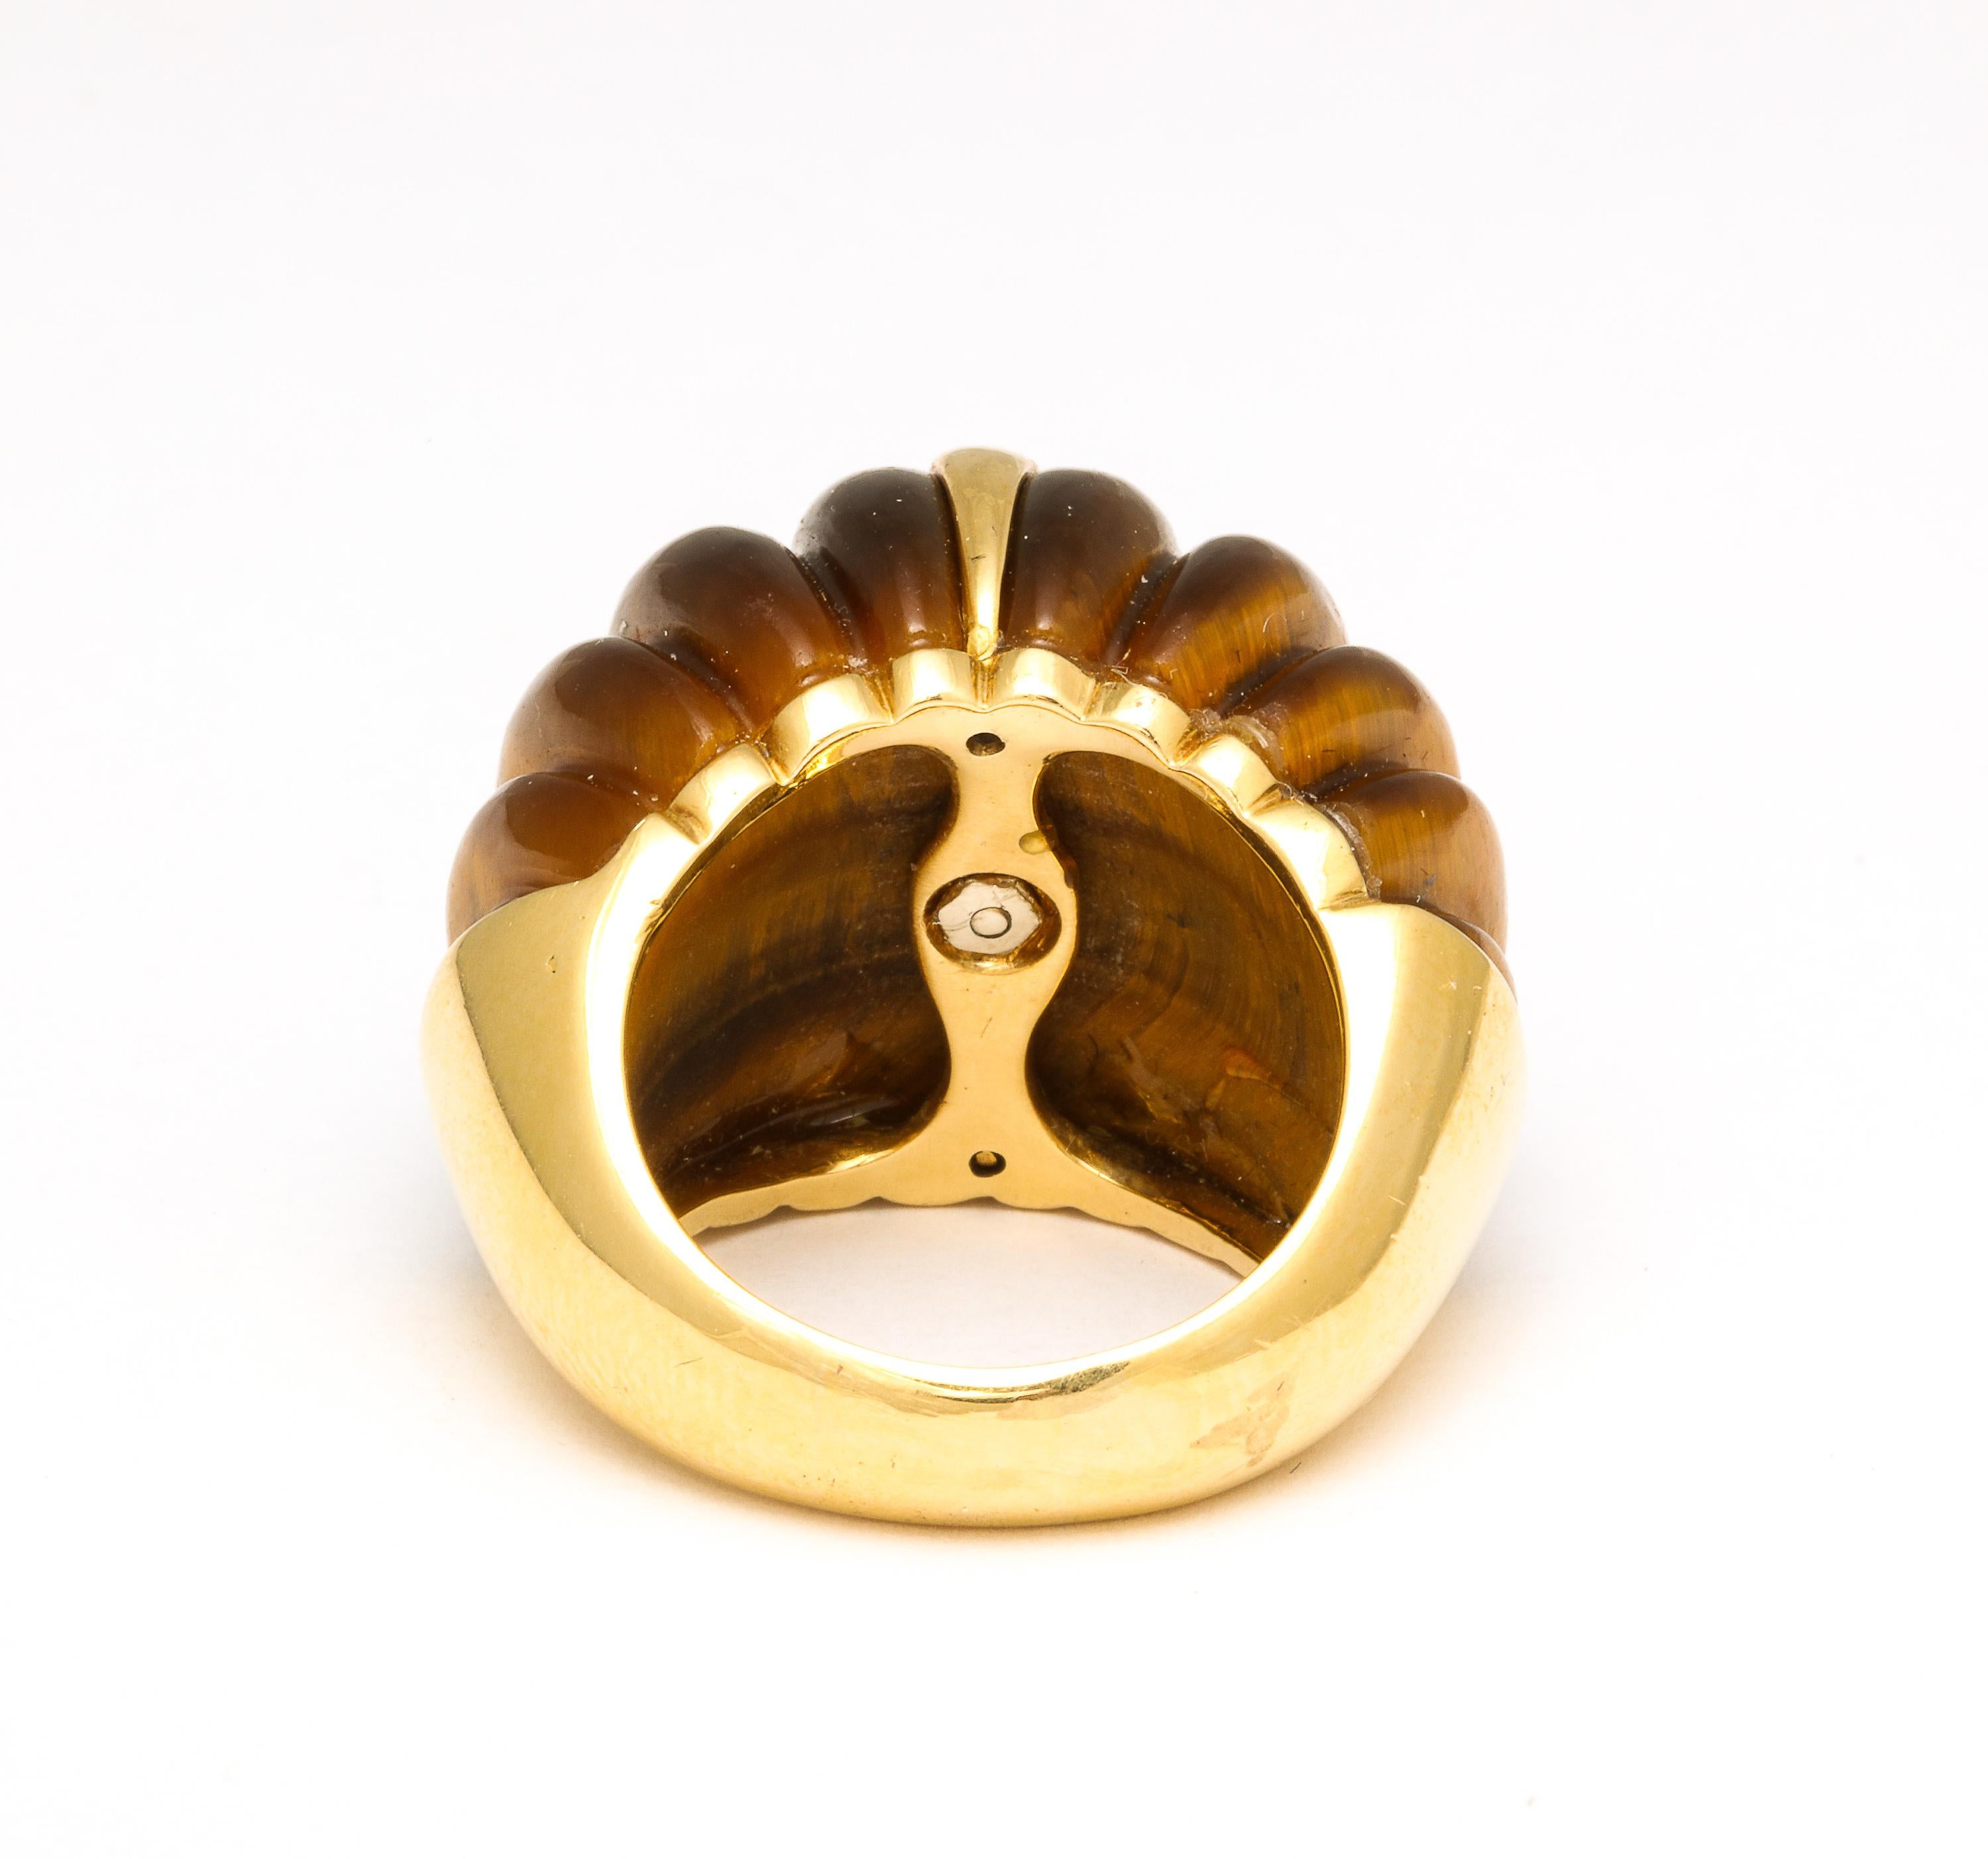 Tiger's Eye Melon Shaped Ring with Center Gold Bar For Sale 2